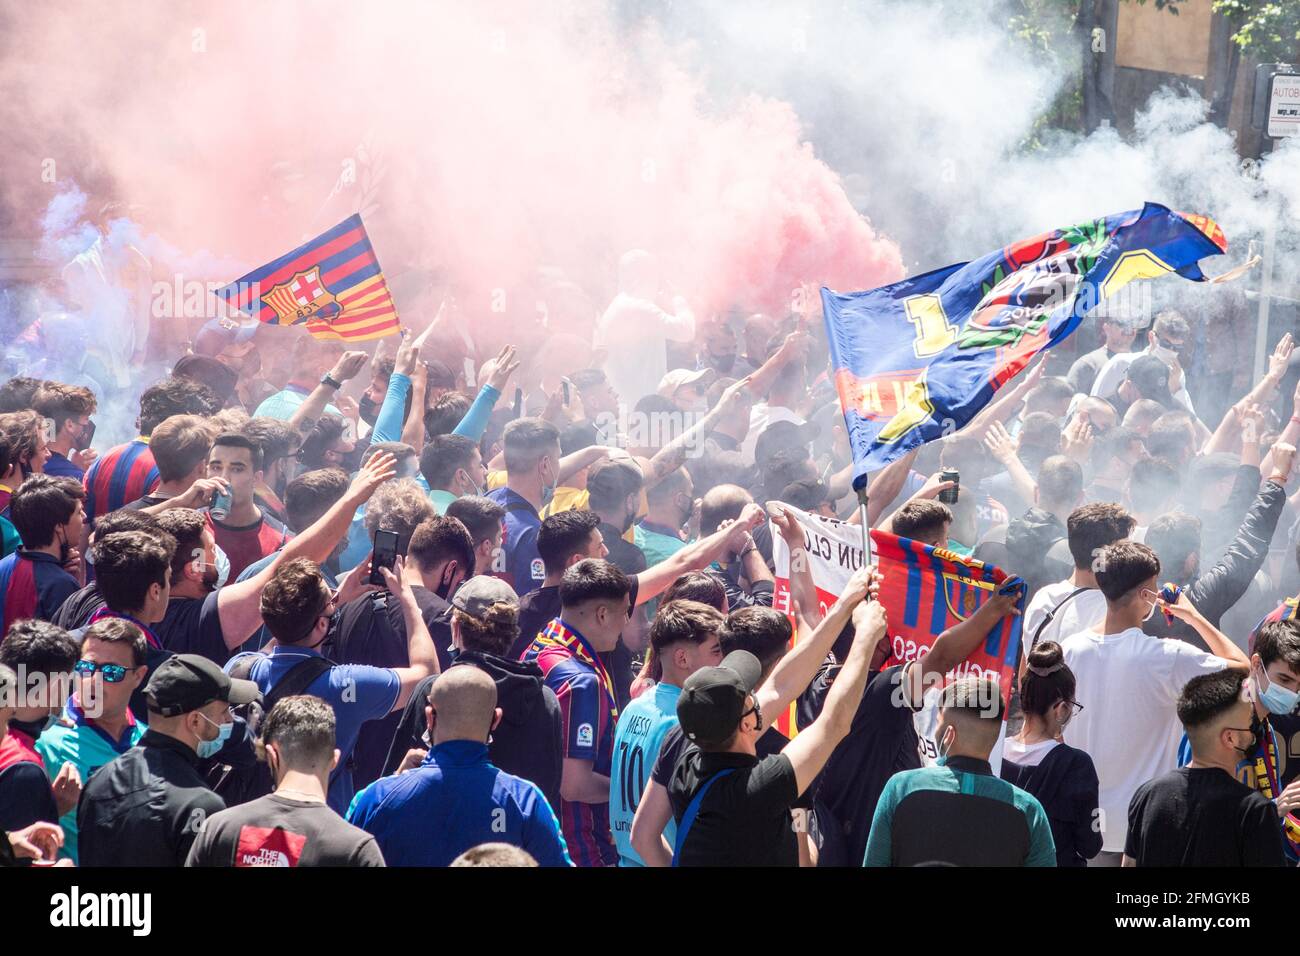 Barcelona, Catalonia, Spain. 8th May, 2021. Futbol Club Barcelona fans are seen with flags and smoke flares.The ultras supporter group of Futbol Club Barcelona, Boixos Nois (Crazy Boys) have gathered outside the Camp Nou stadium to motivate the team before the match against Club Atletico de Madrid for the 35th round of La Liga, the Spanish football league. Barça's victory will put the team, currently in third place, ahead of Atletico de Madrid, which occupies the first position. Credit: Thiago Prudencio/DAX/ZUMA Wire/Alamy Live News Stock Photo